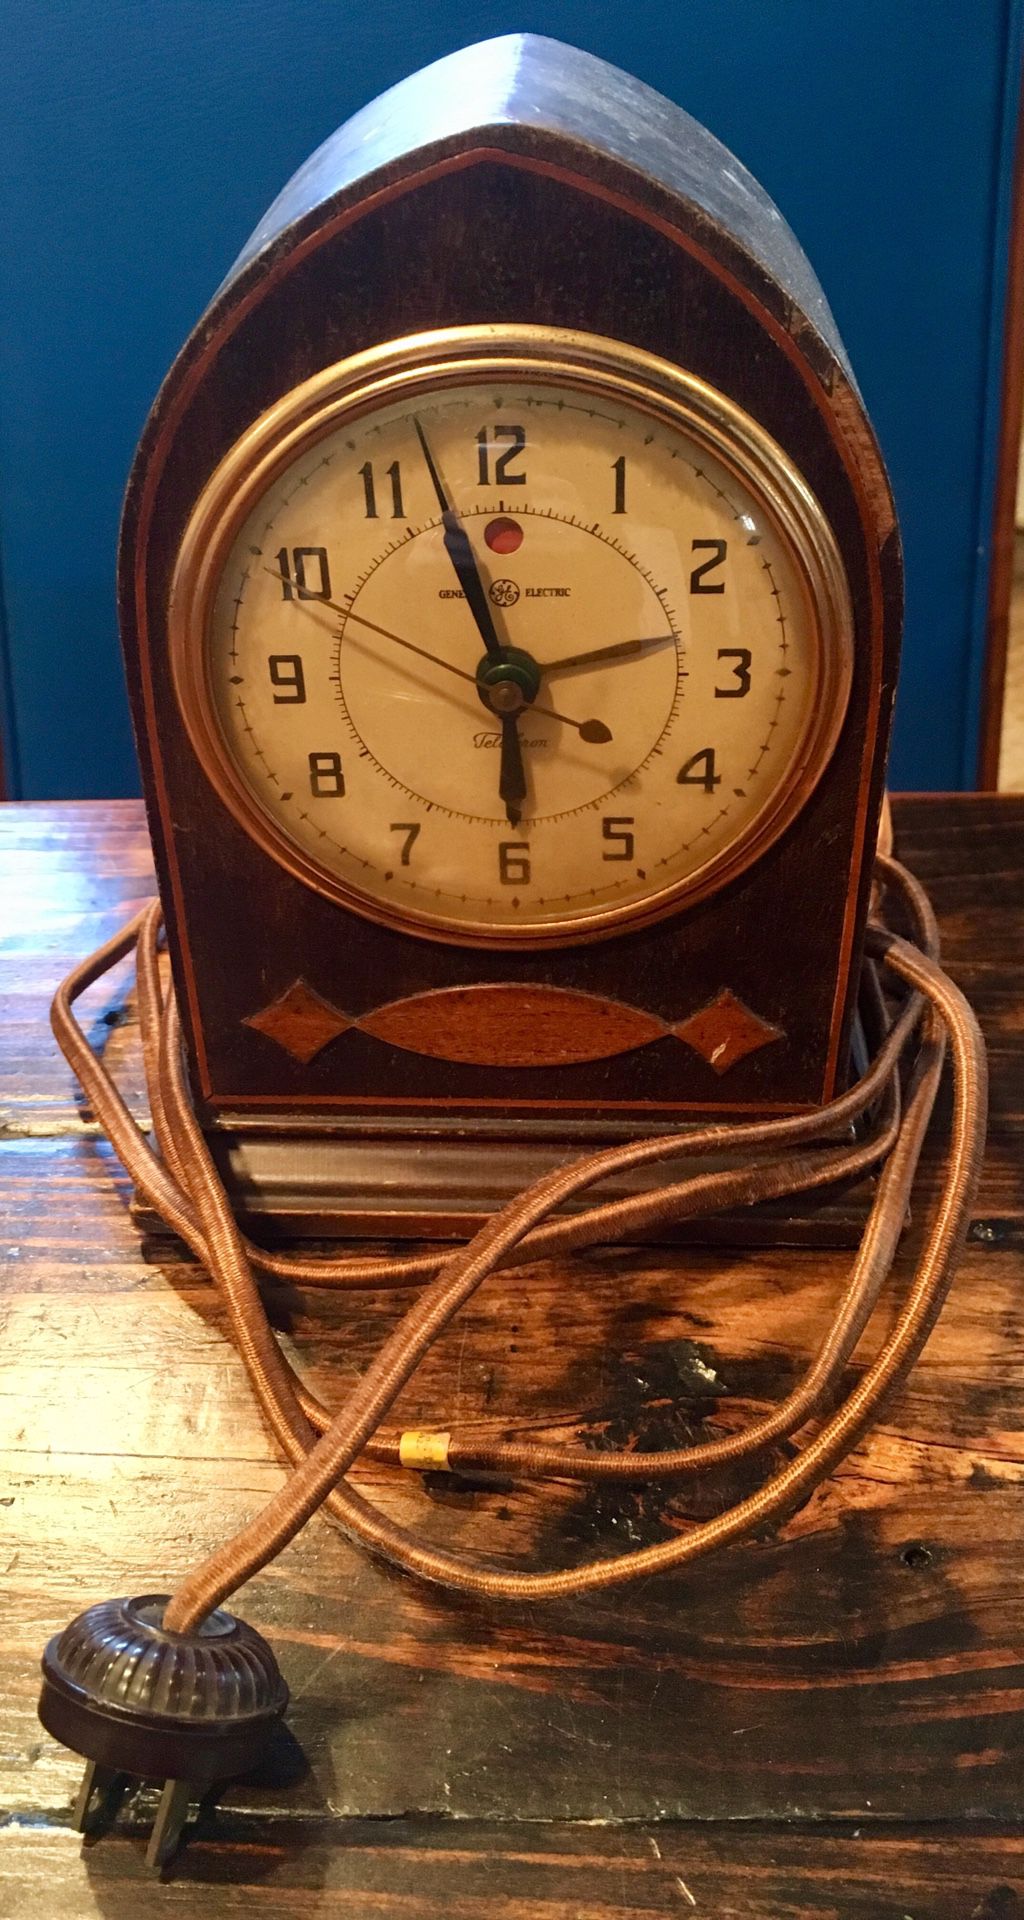 Antique General Electric wooden clock, doesn’t work